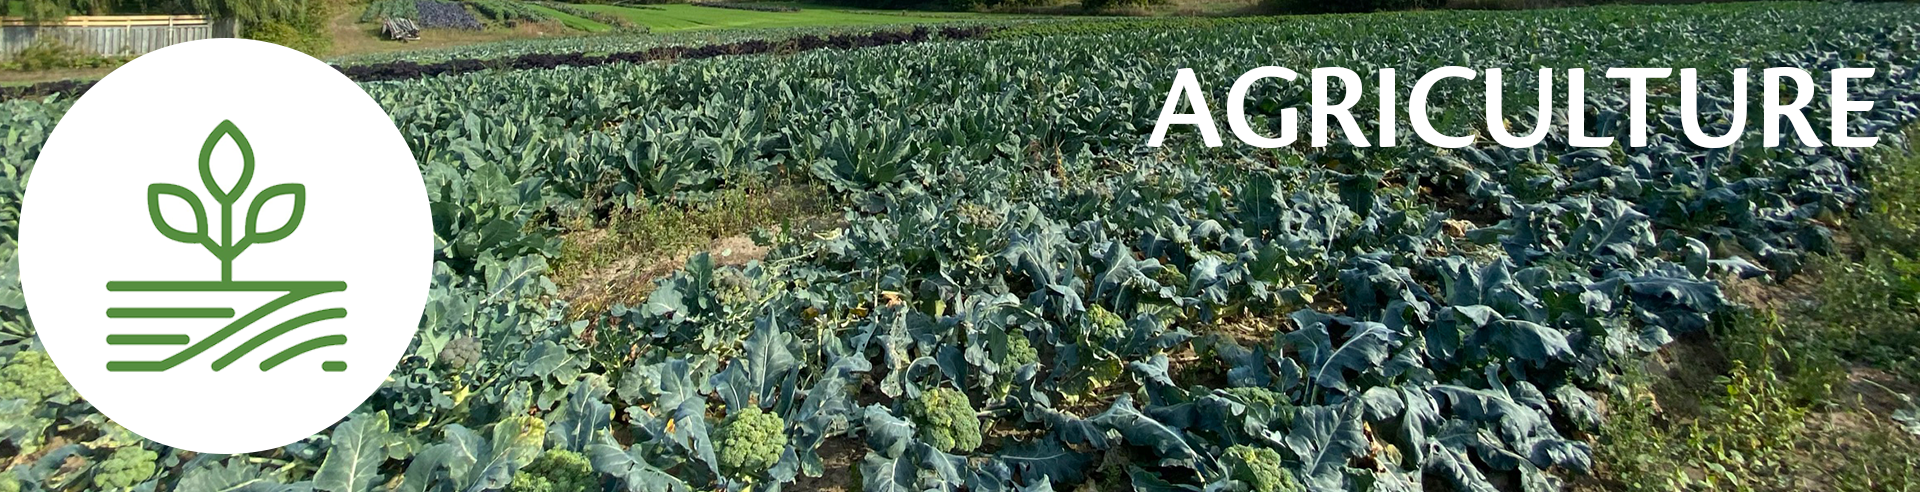 Agriculture Banner with a field of vegetables